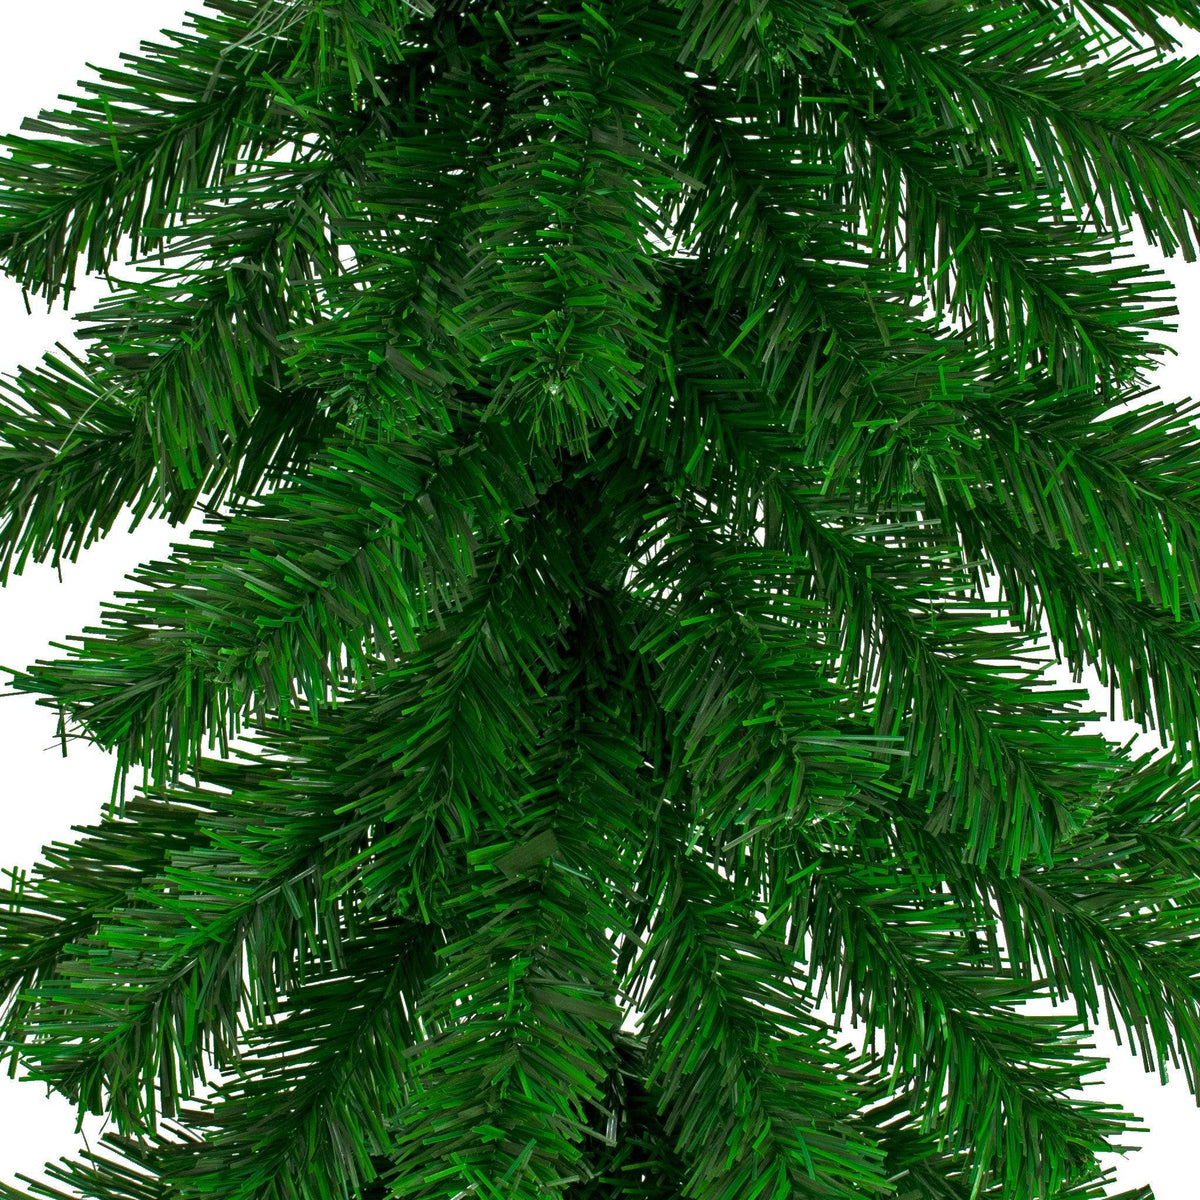 6FT Alpine Green Brush Garland on sale at leedisplay.com. Comes with unlit and undecorated.